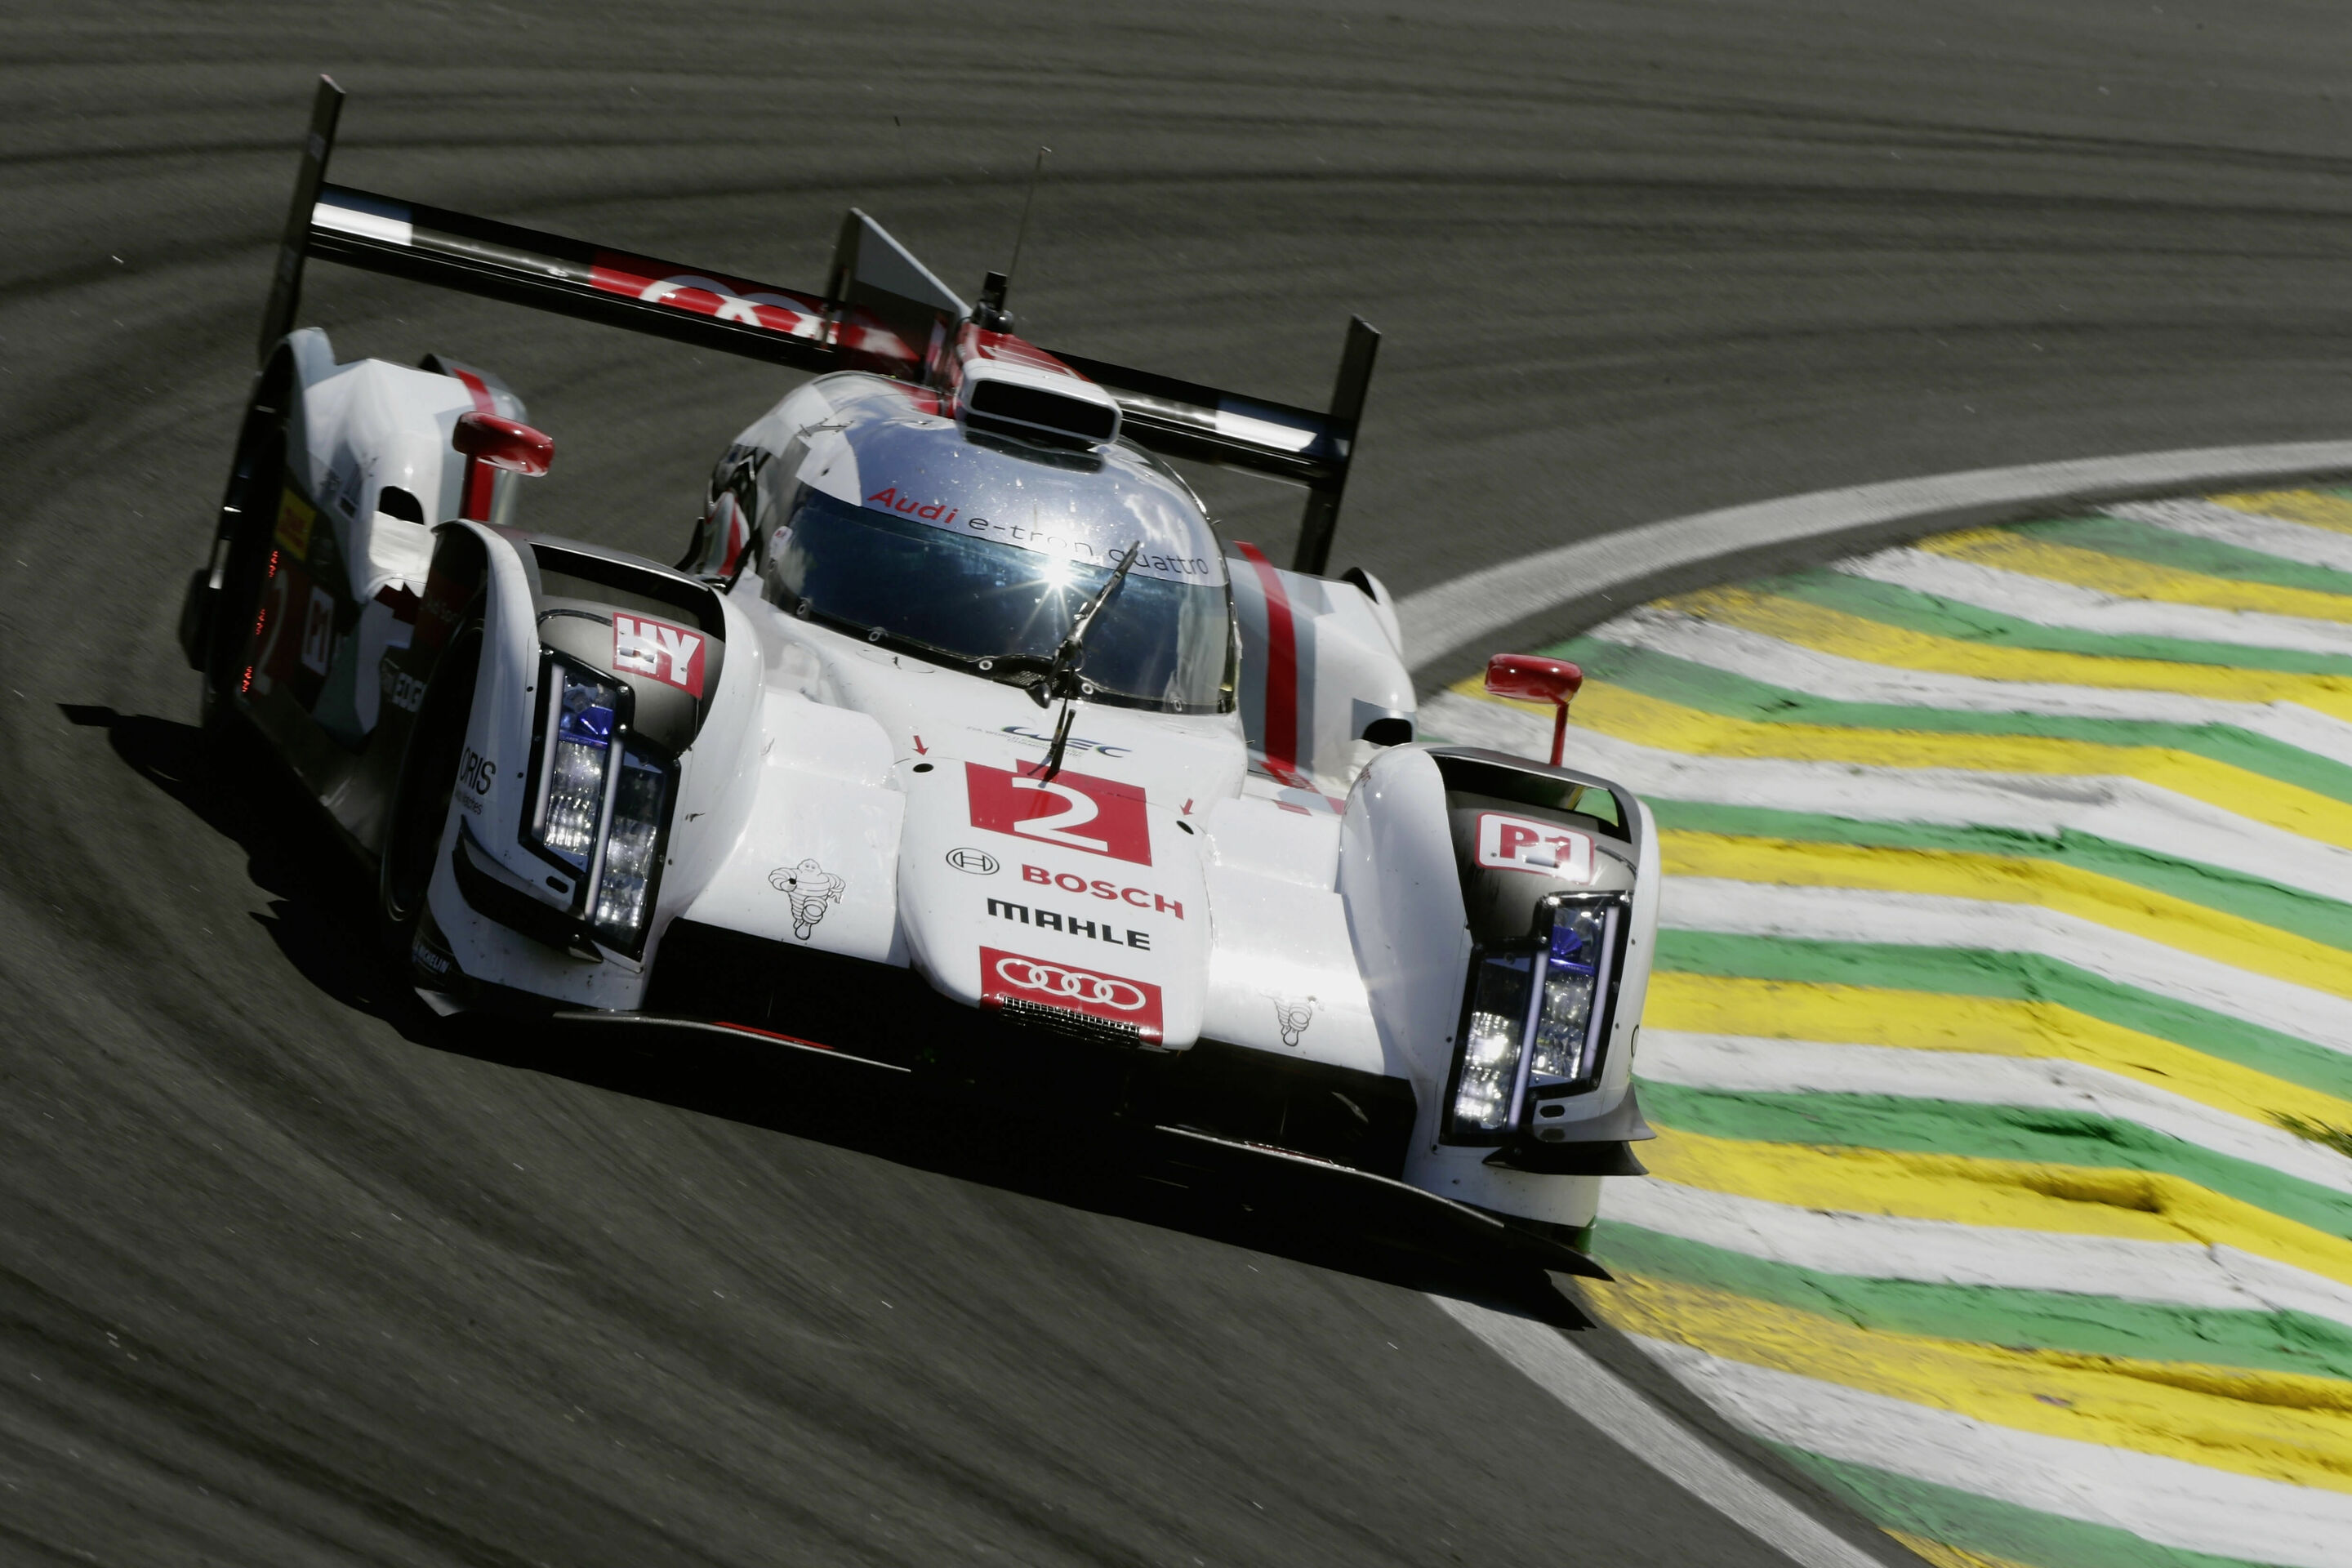 Second row of the grid for Audi in WEC finale